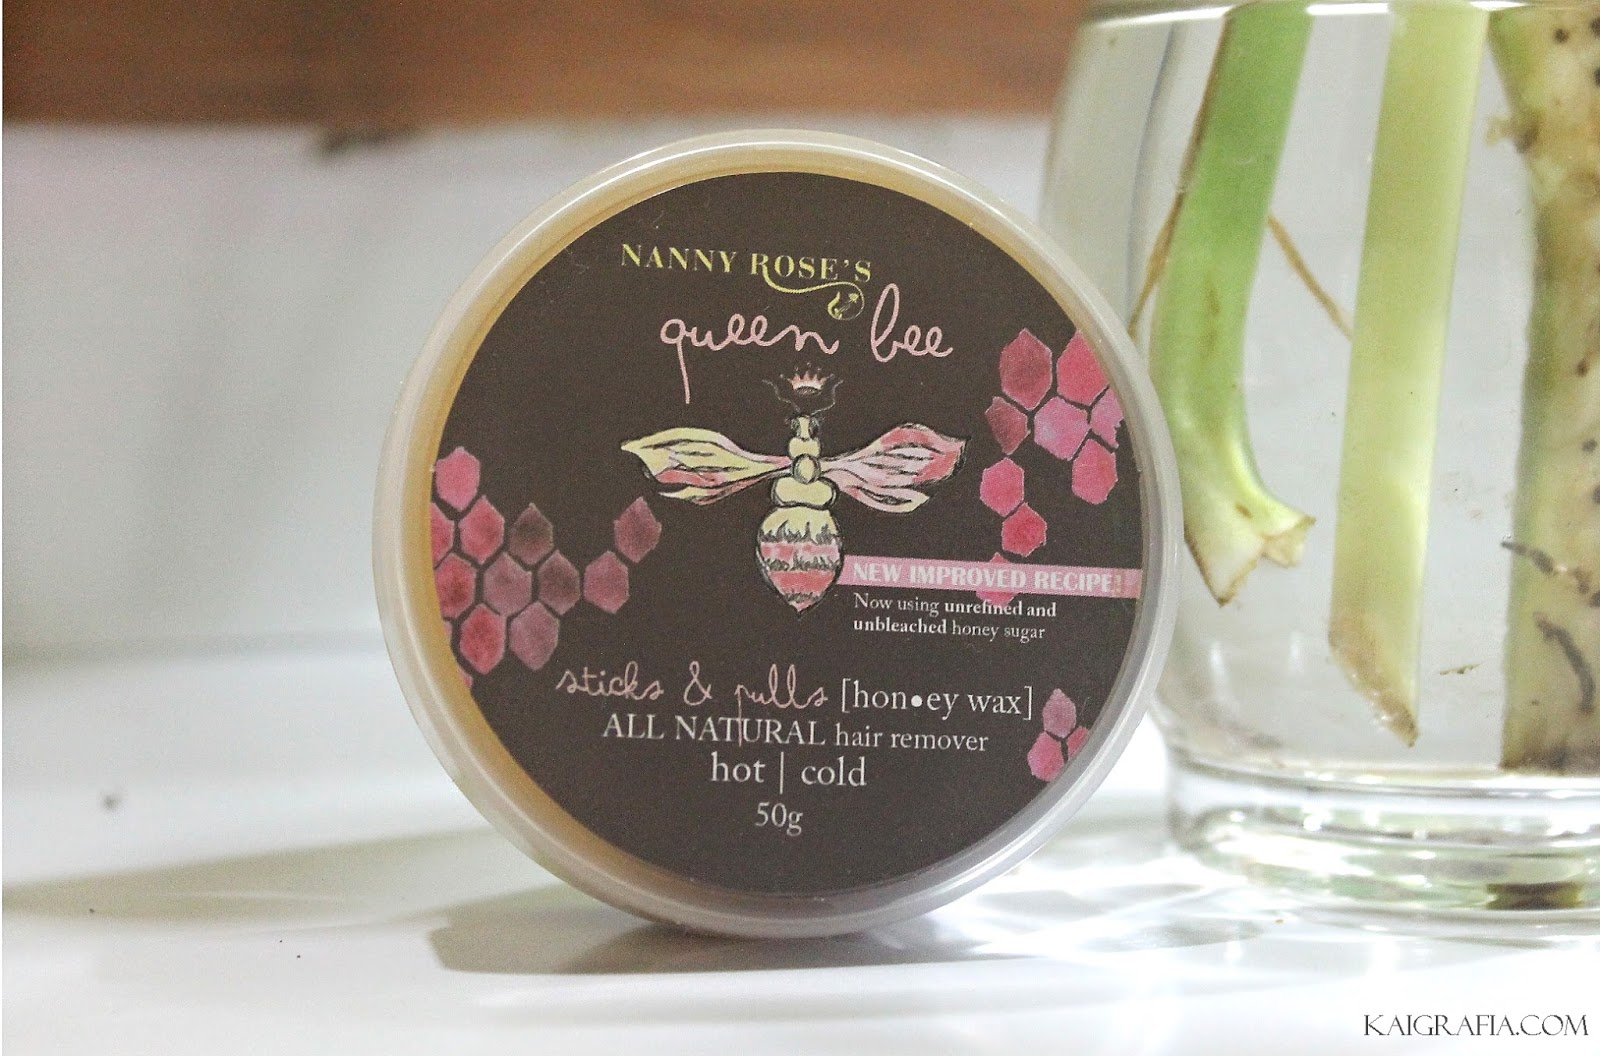 Nanny Rose Sticks And Pulls Honey Wax review